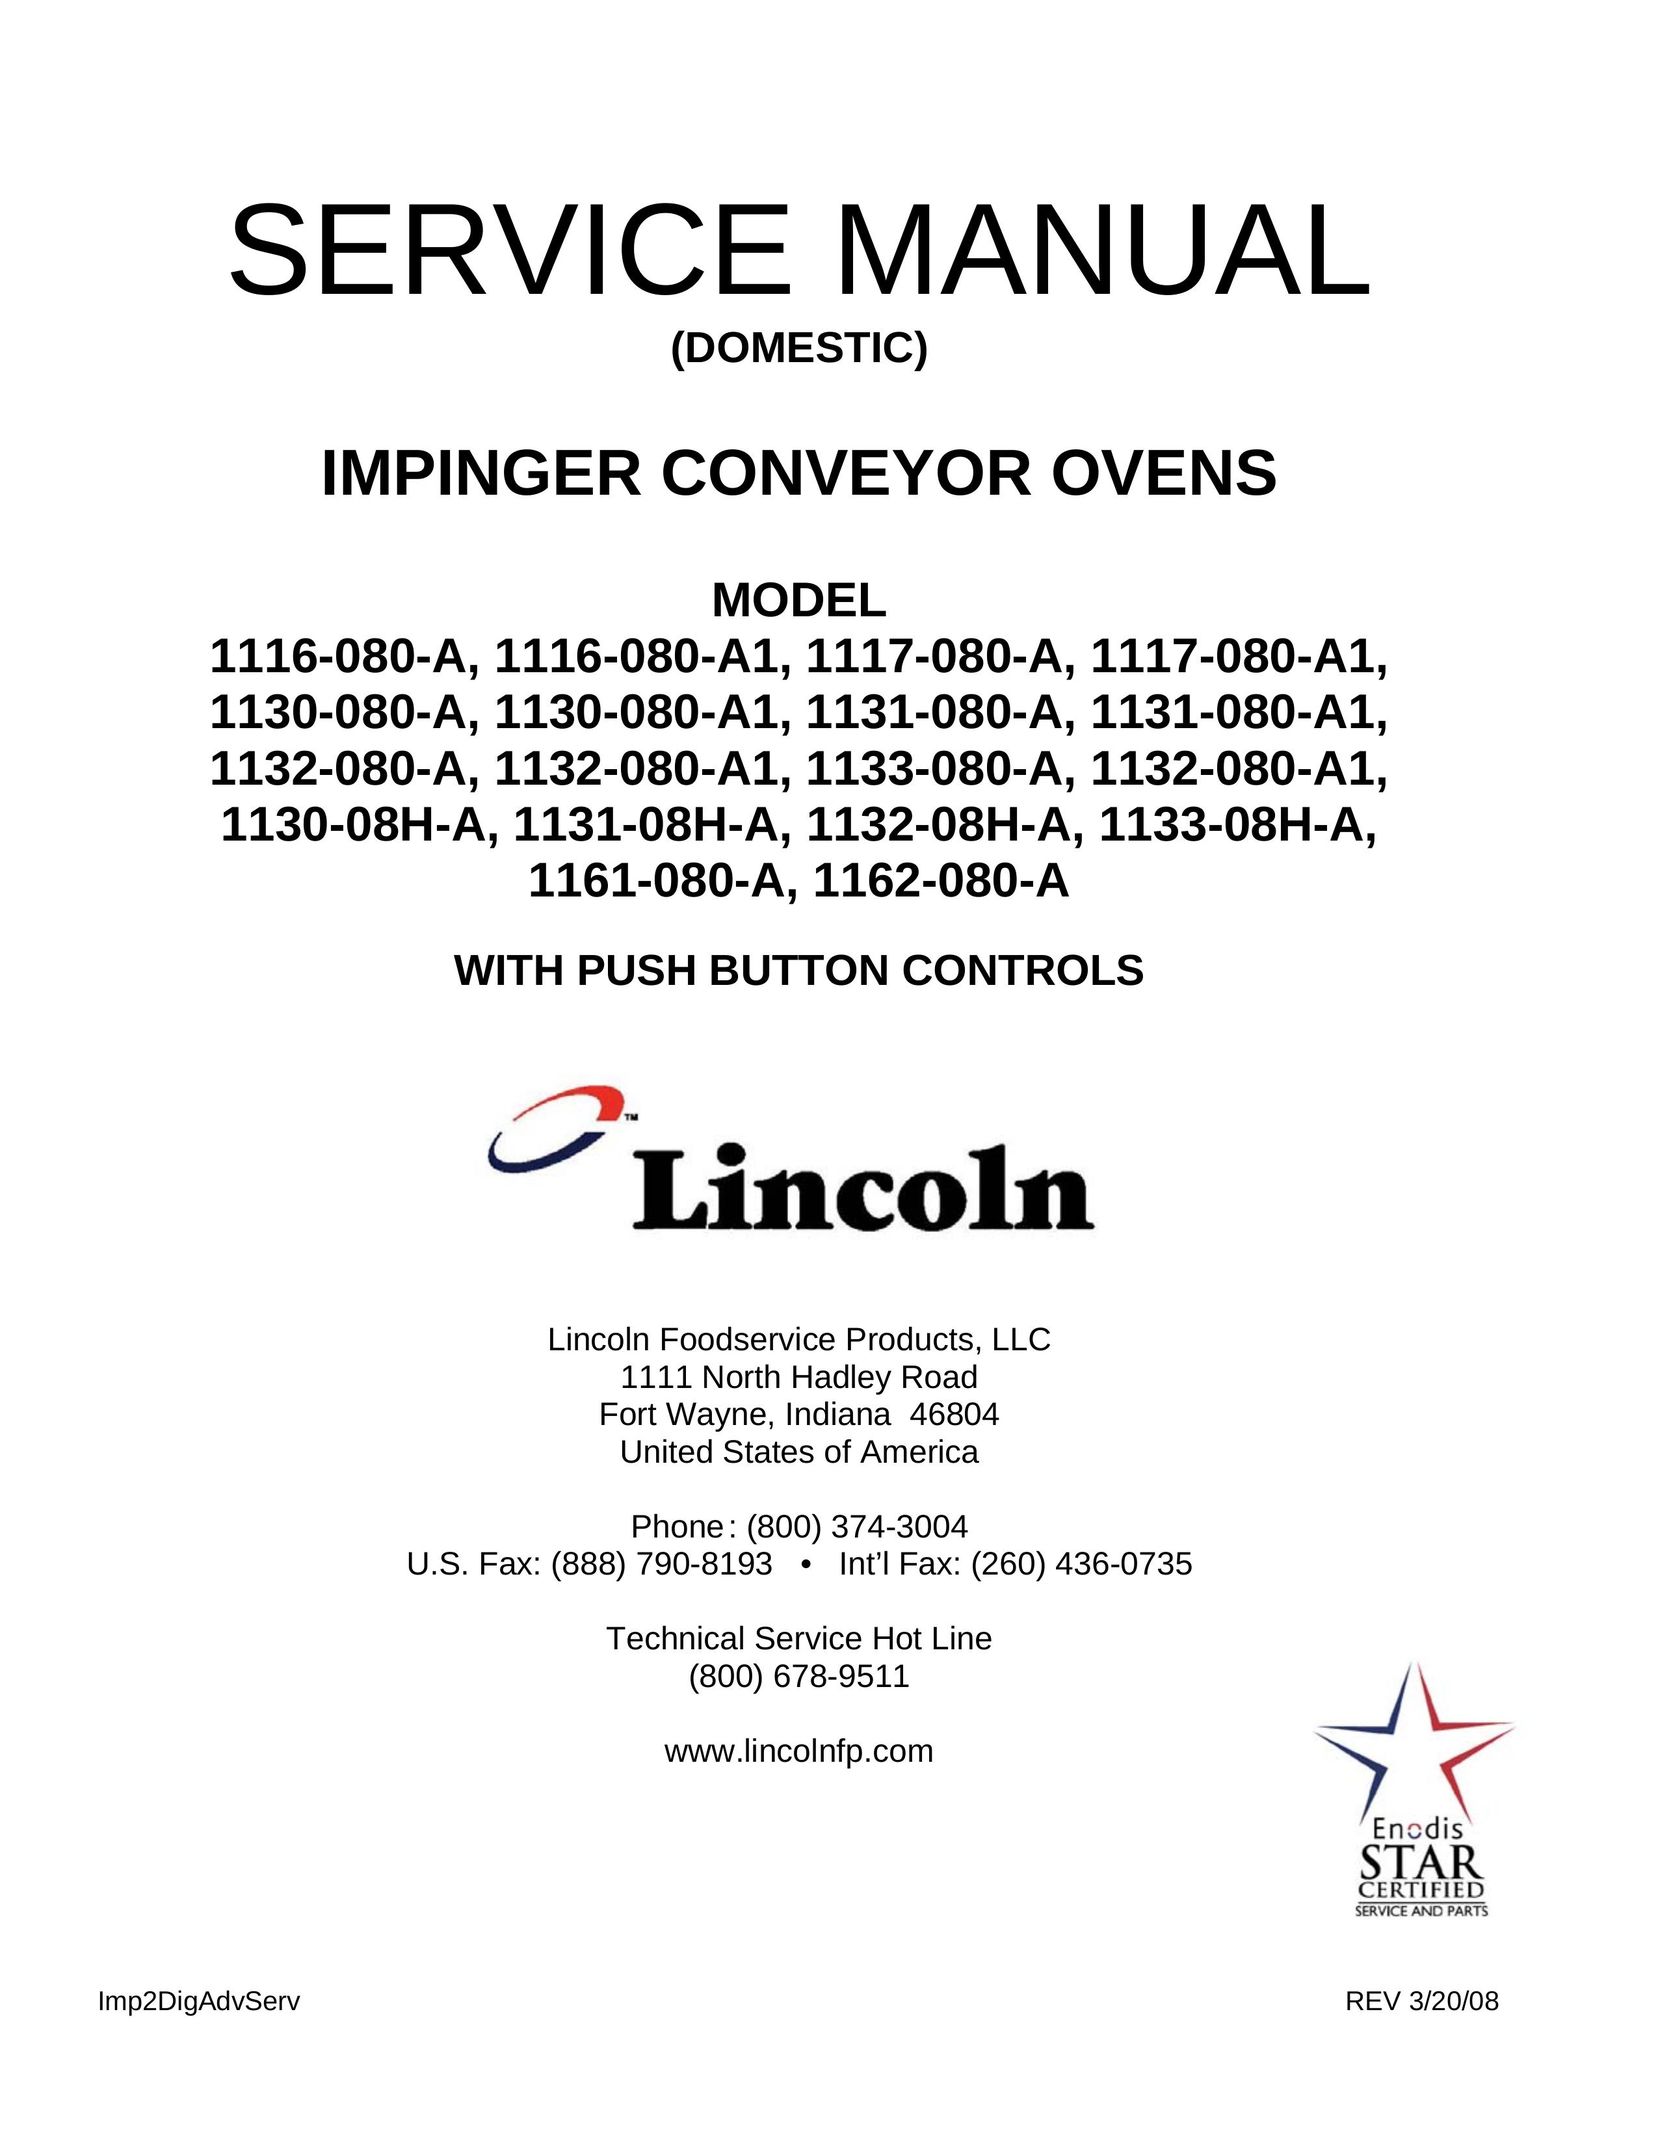 Lincoln 1130-08H-A Convection Oven User Manual